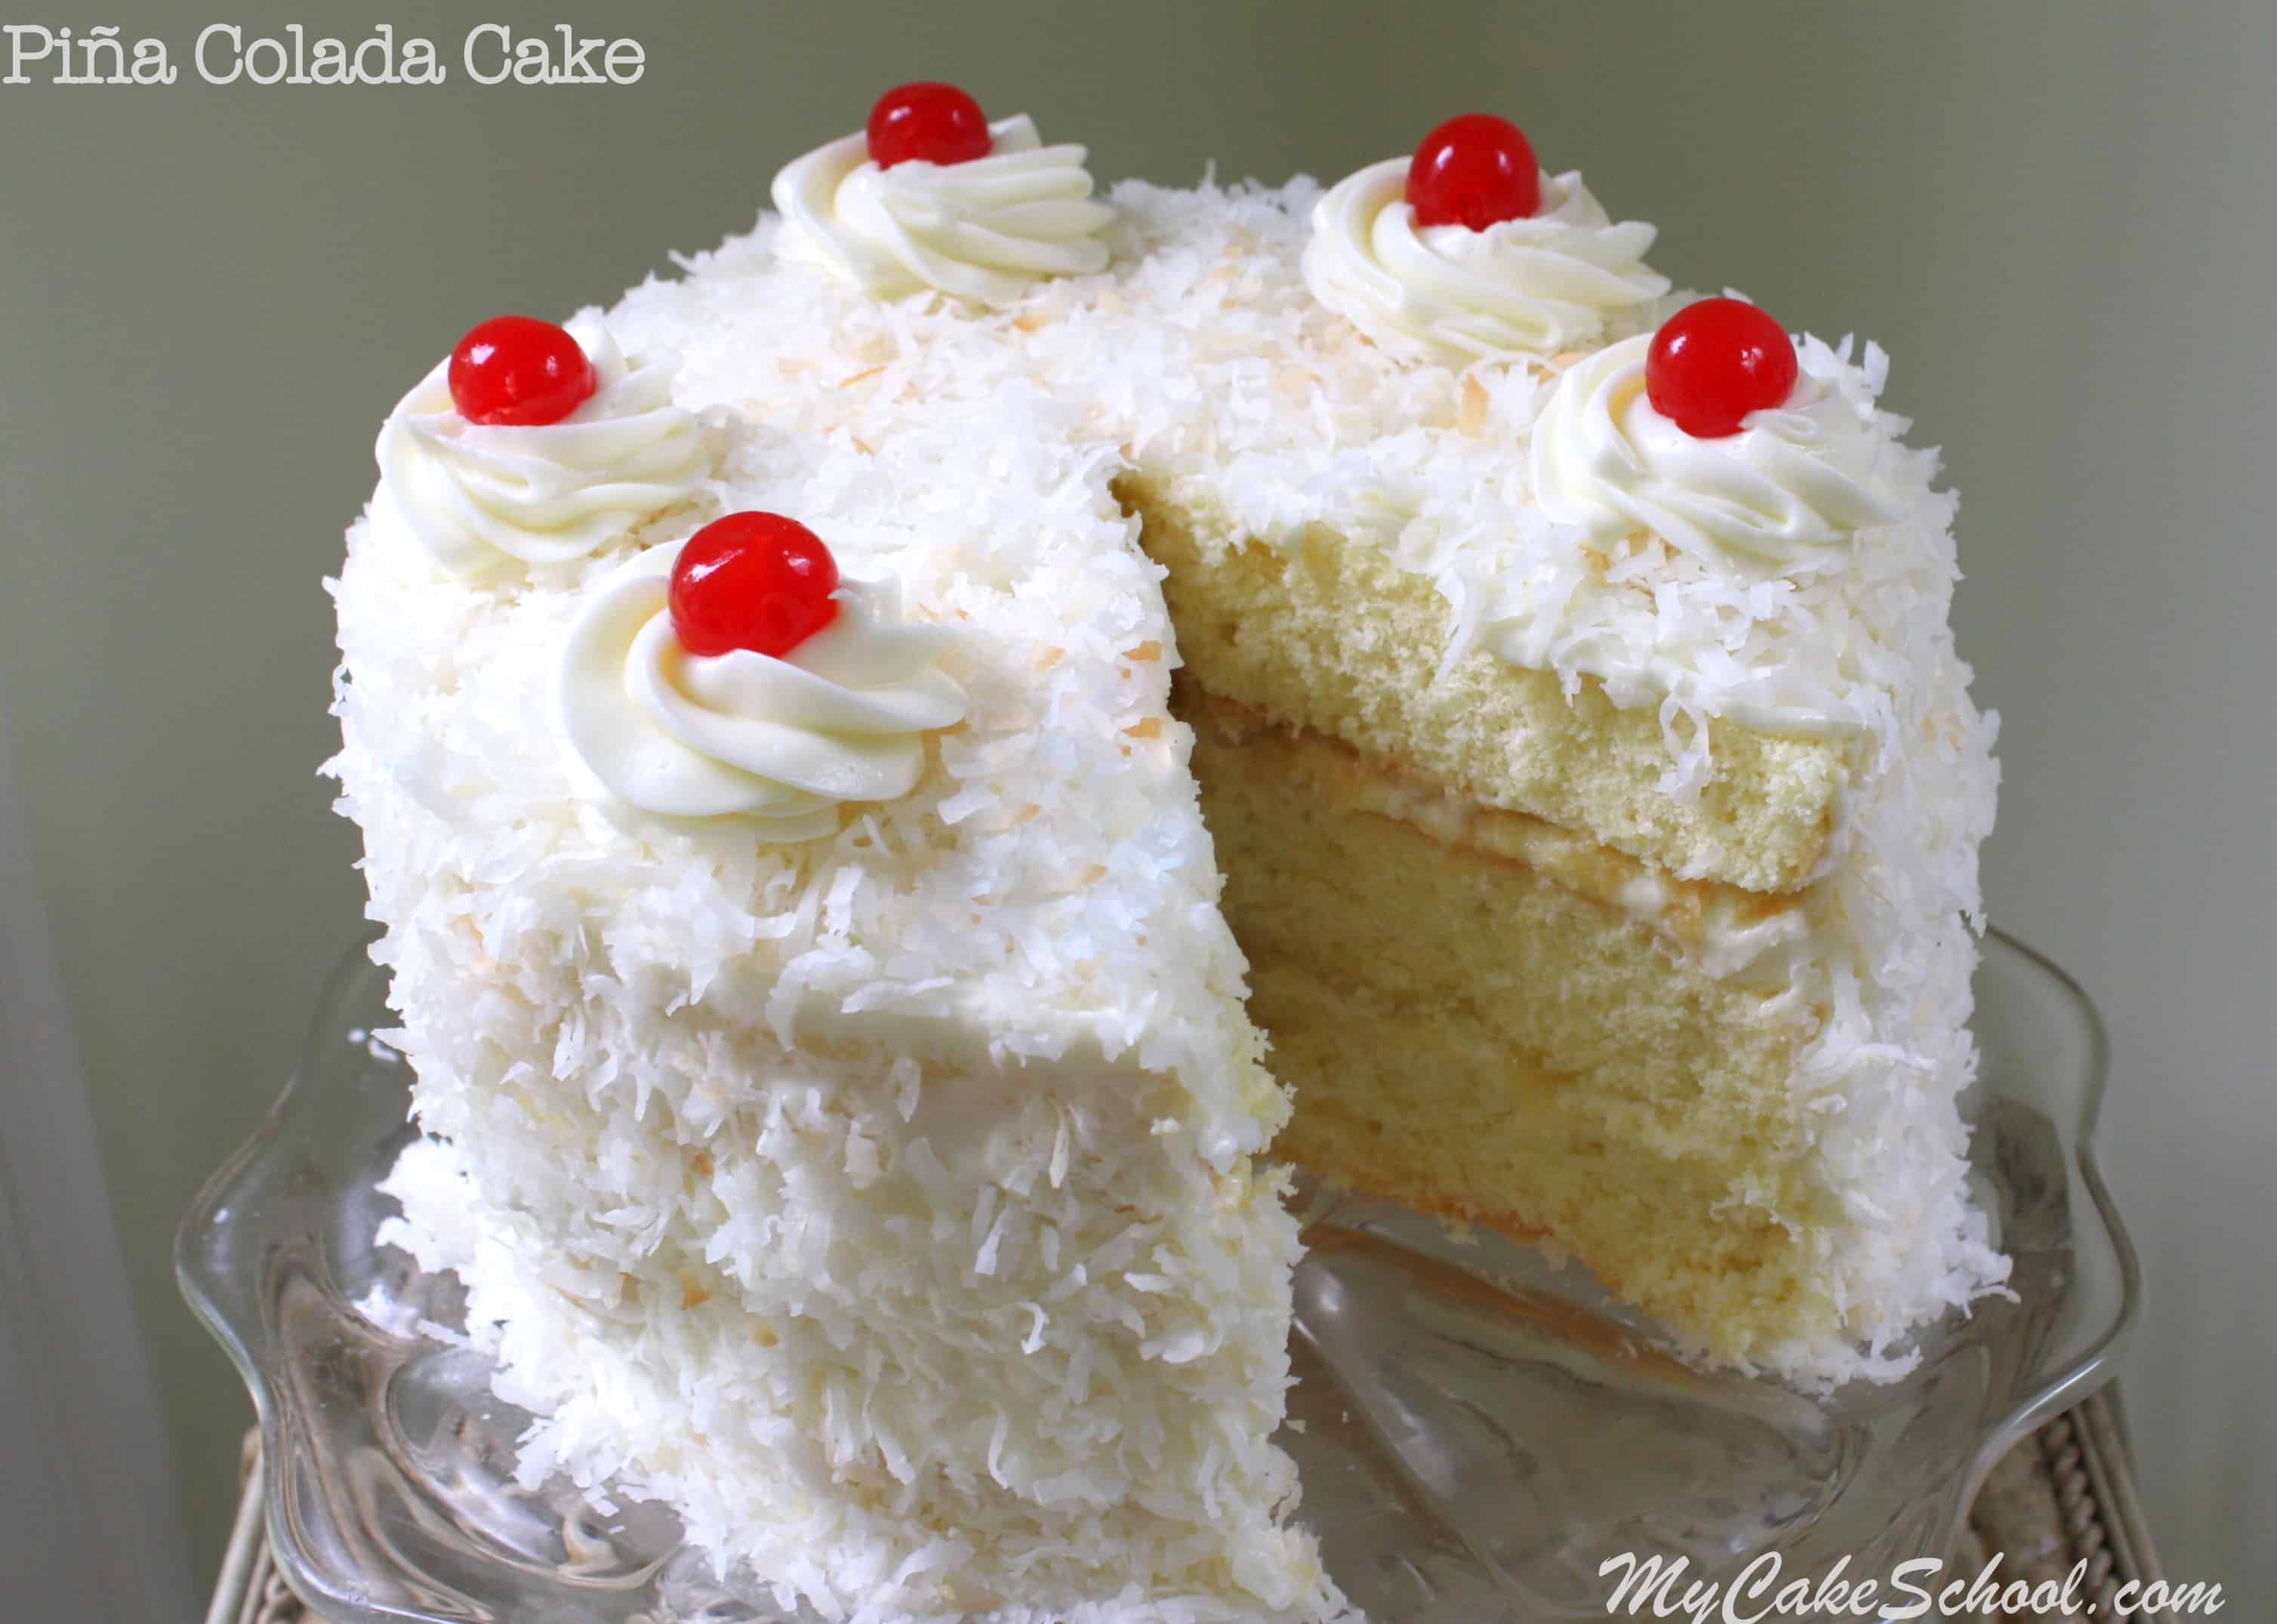 Pina colada cake with coconut icing and crushed pineapple filling